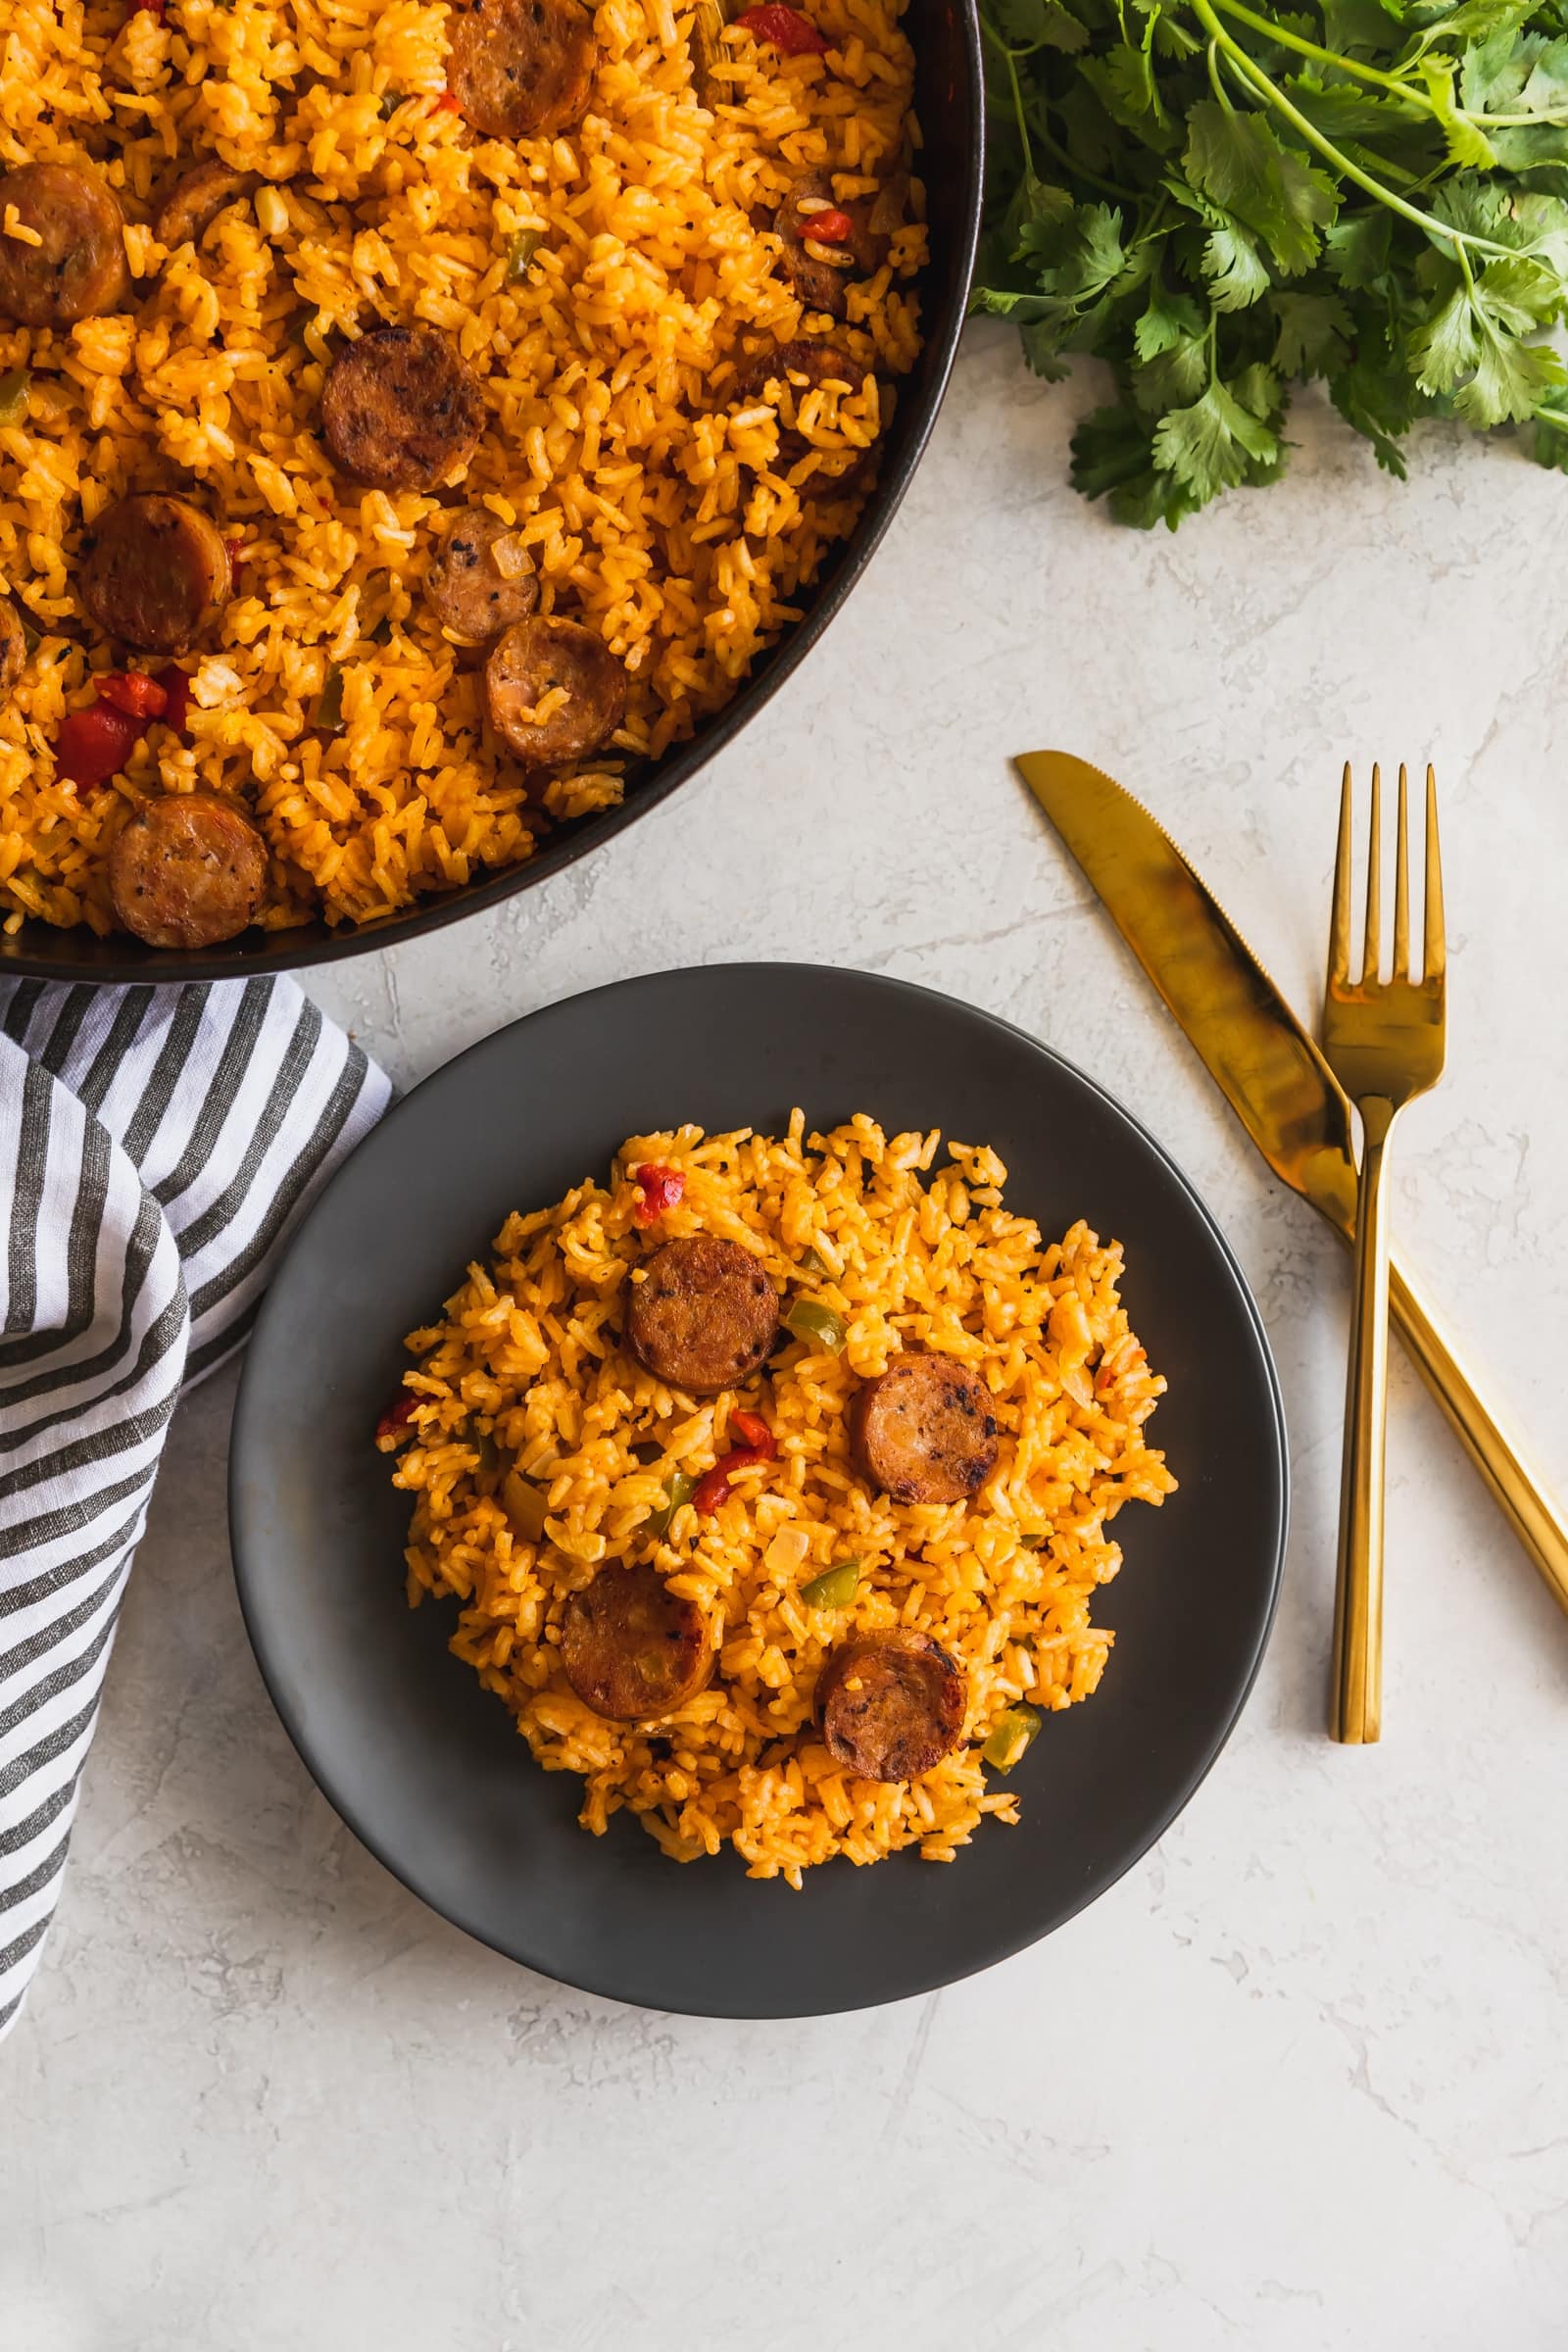 A 30-minute version of the Cuban staple "arroz con salchicha" (Cuban-style yellow rice with Vienna sausages) using long grain rice, spices and chicken sausage.